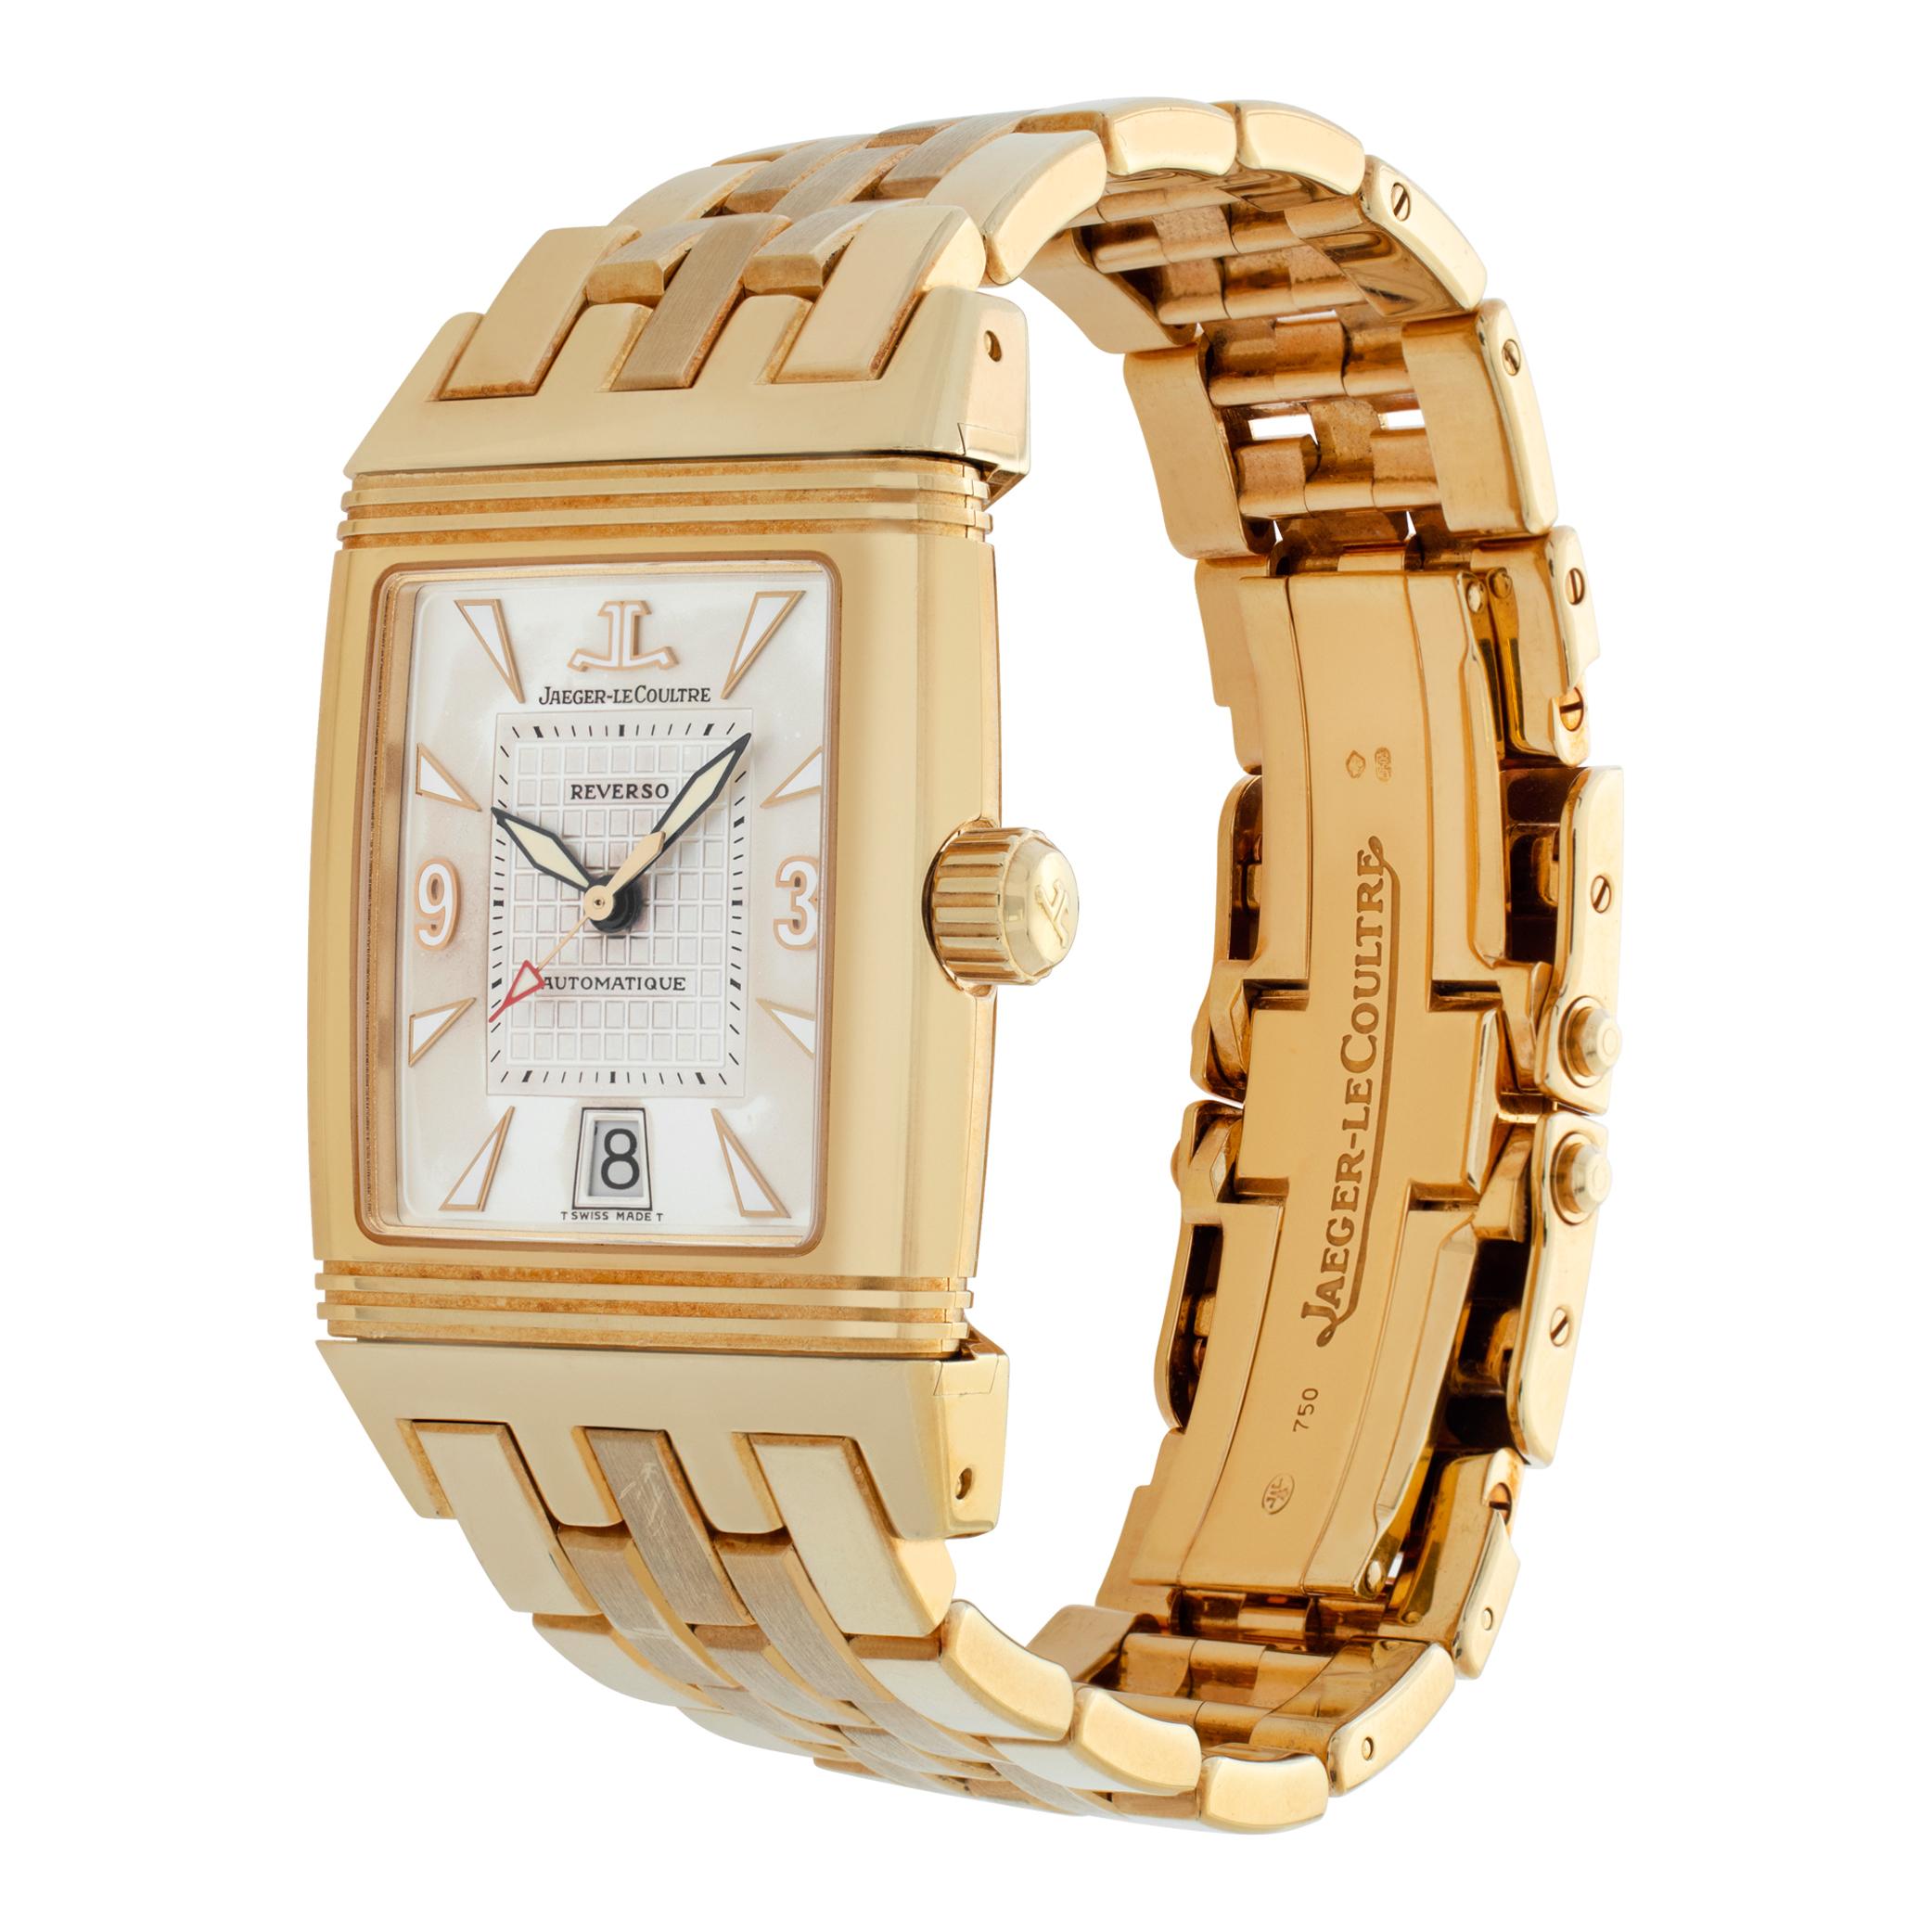 Jaeger LeCoultre Gran Sport Reverso in 18k yellow gold on an 18k bracelet. Auto w/ sweep seconds and date. 43 mm length by 26 mm width case size. Ref 290.1.60. Fine Pre-owned Jaeger LeCoultre Watch.

 Certified preowned Classic Jaeger LeCoultre